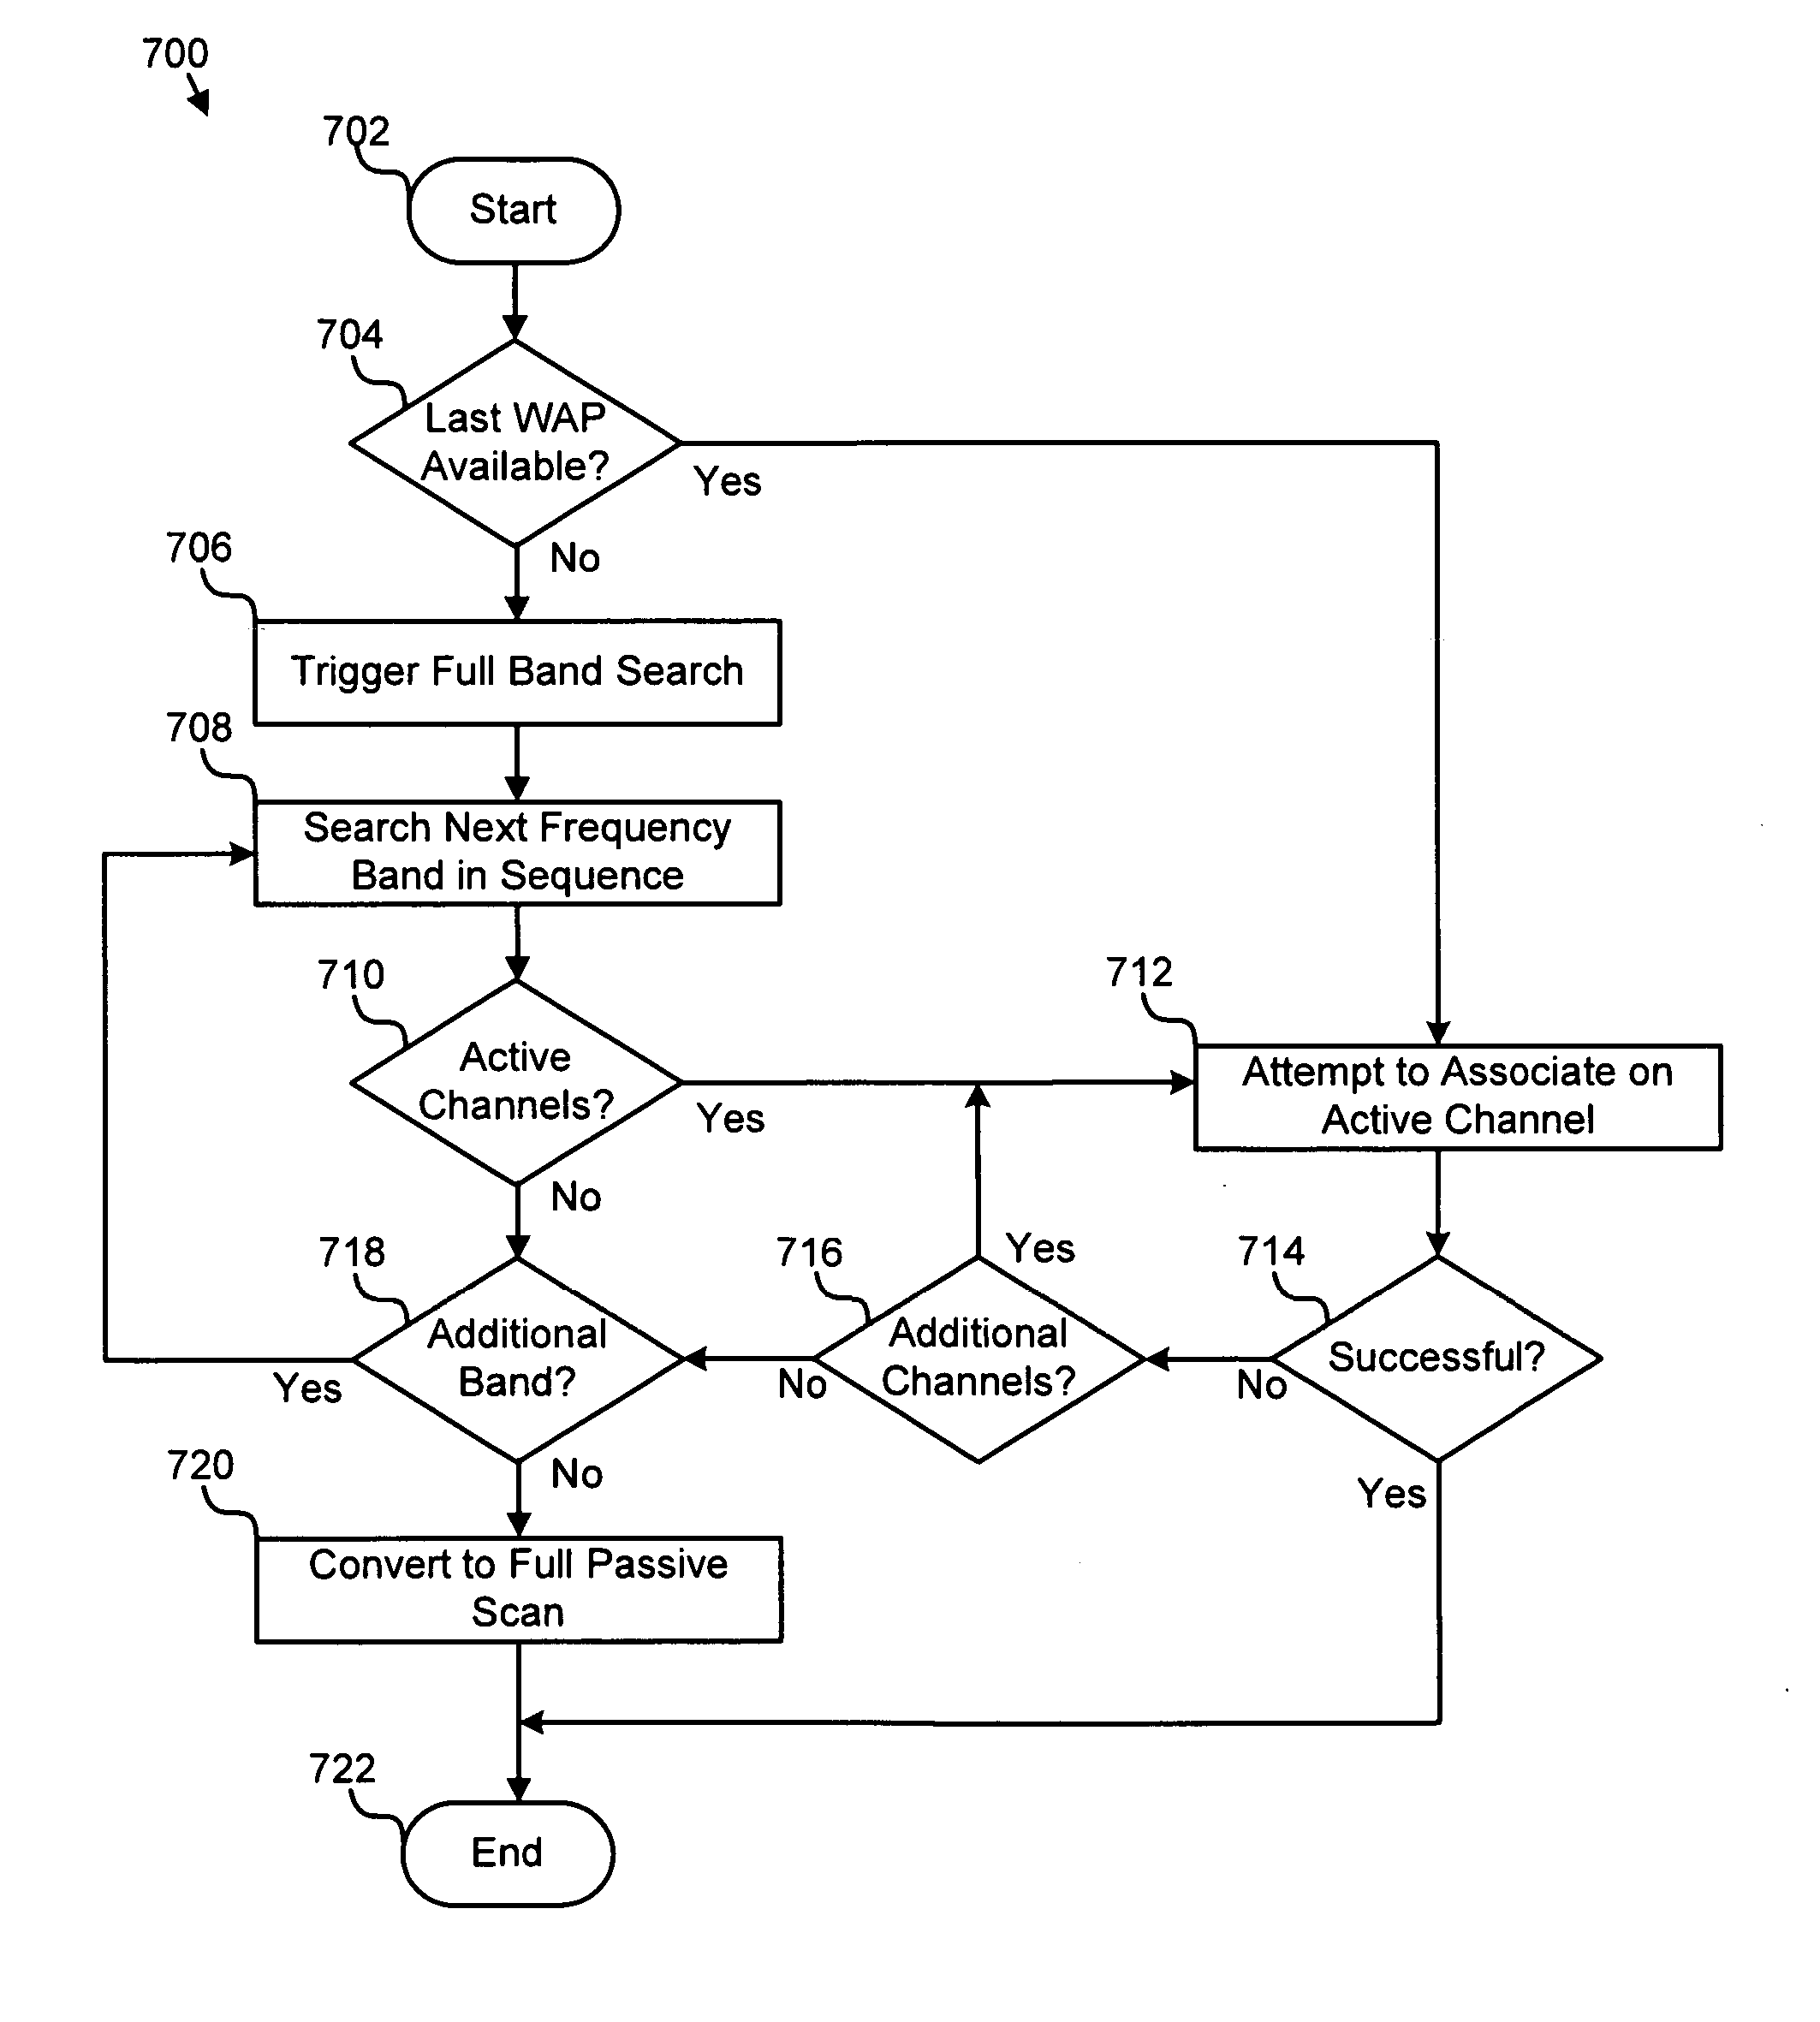 Apparatus, system, and method for rapid wireless network association